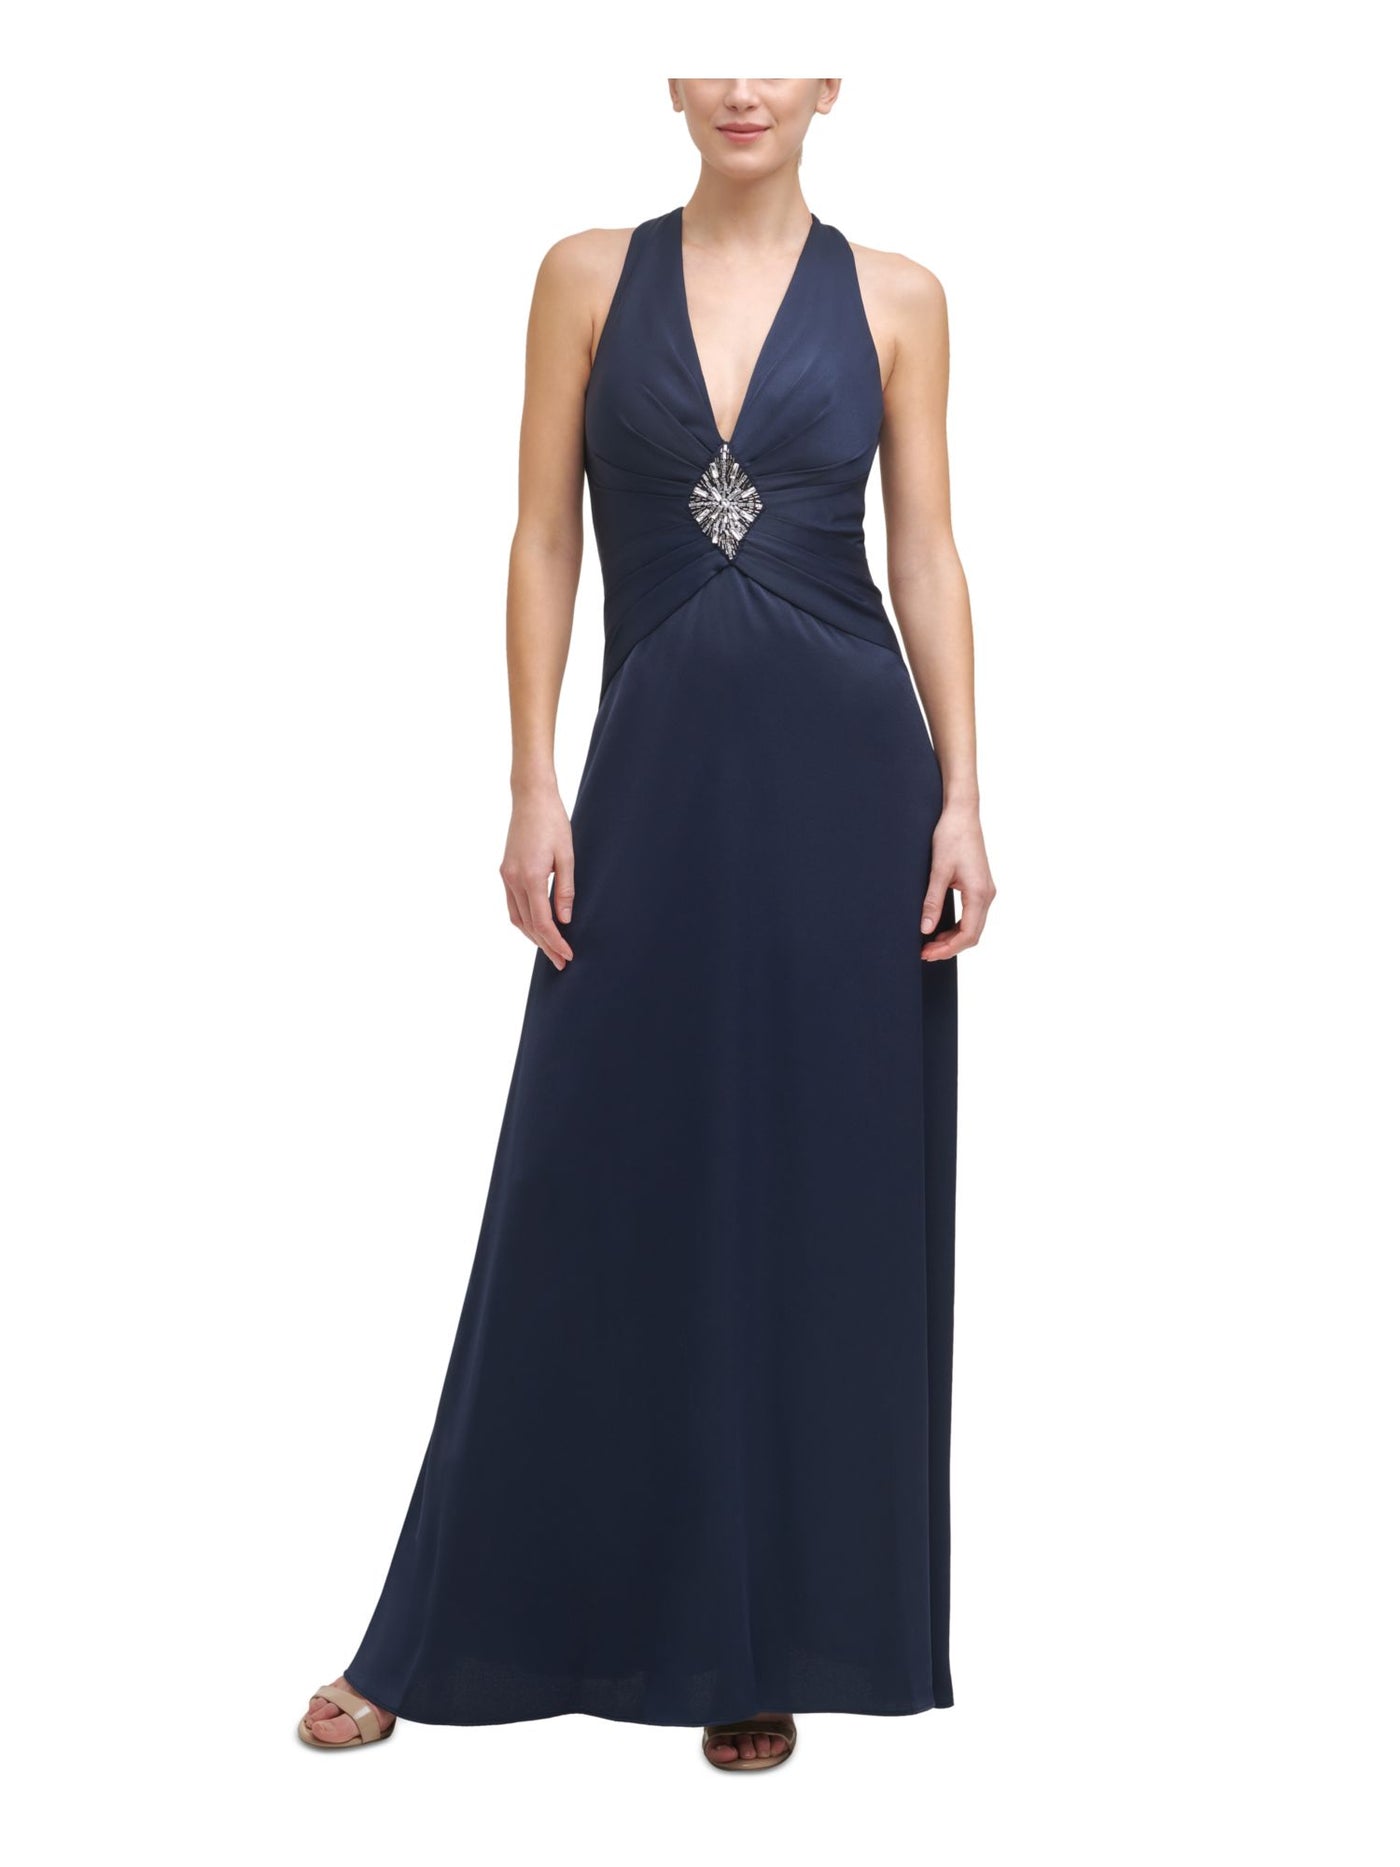 VINCE CAMUTO Womens Navy Zippered Embellished Cross-back Pleated Sleeveless V Neck Full-Length Evening Gown Dress 2